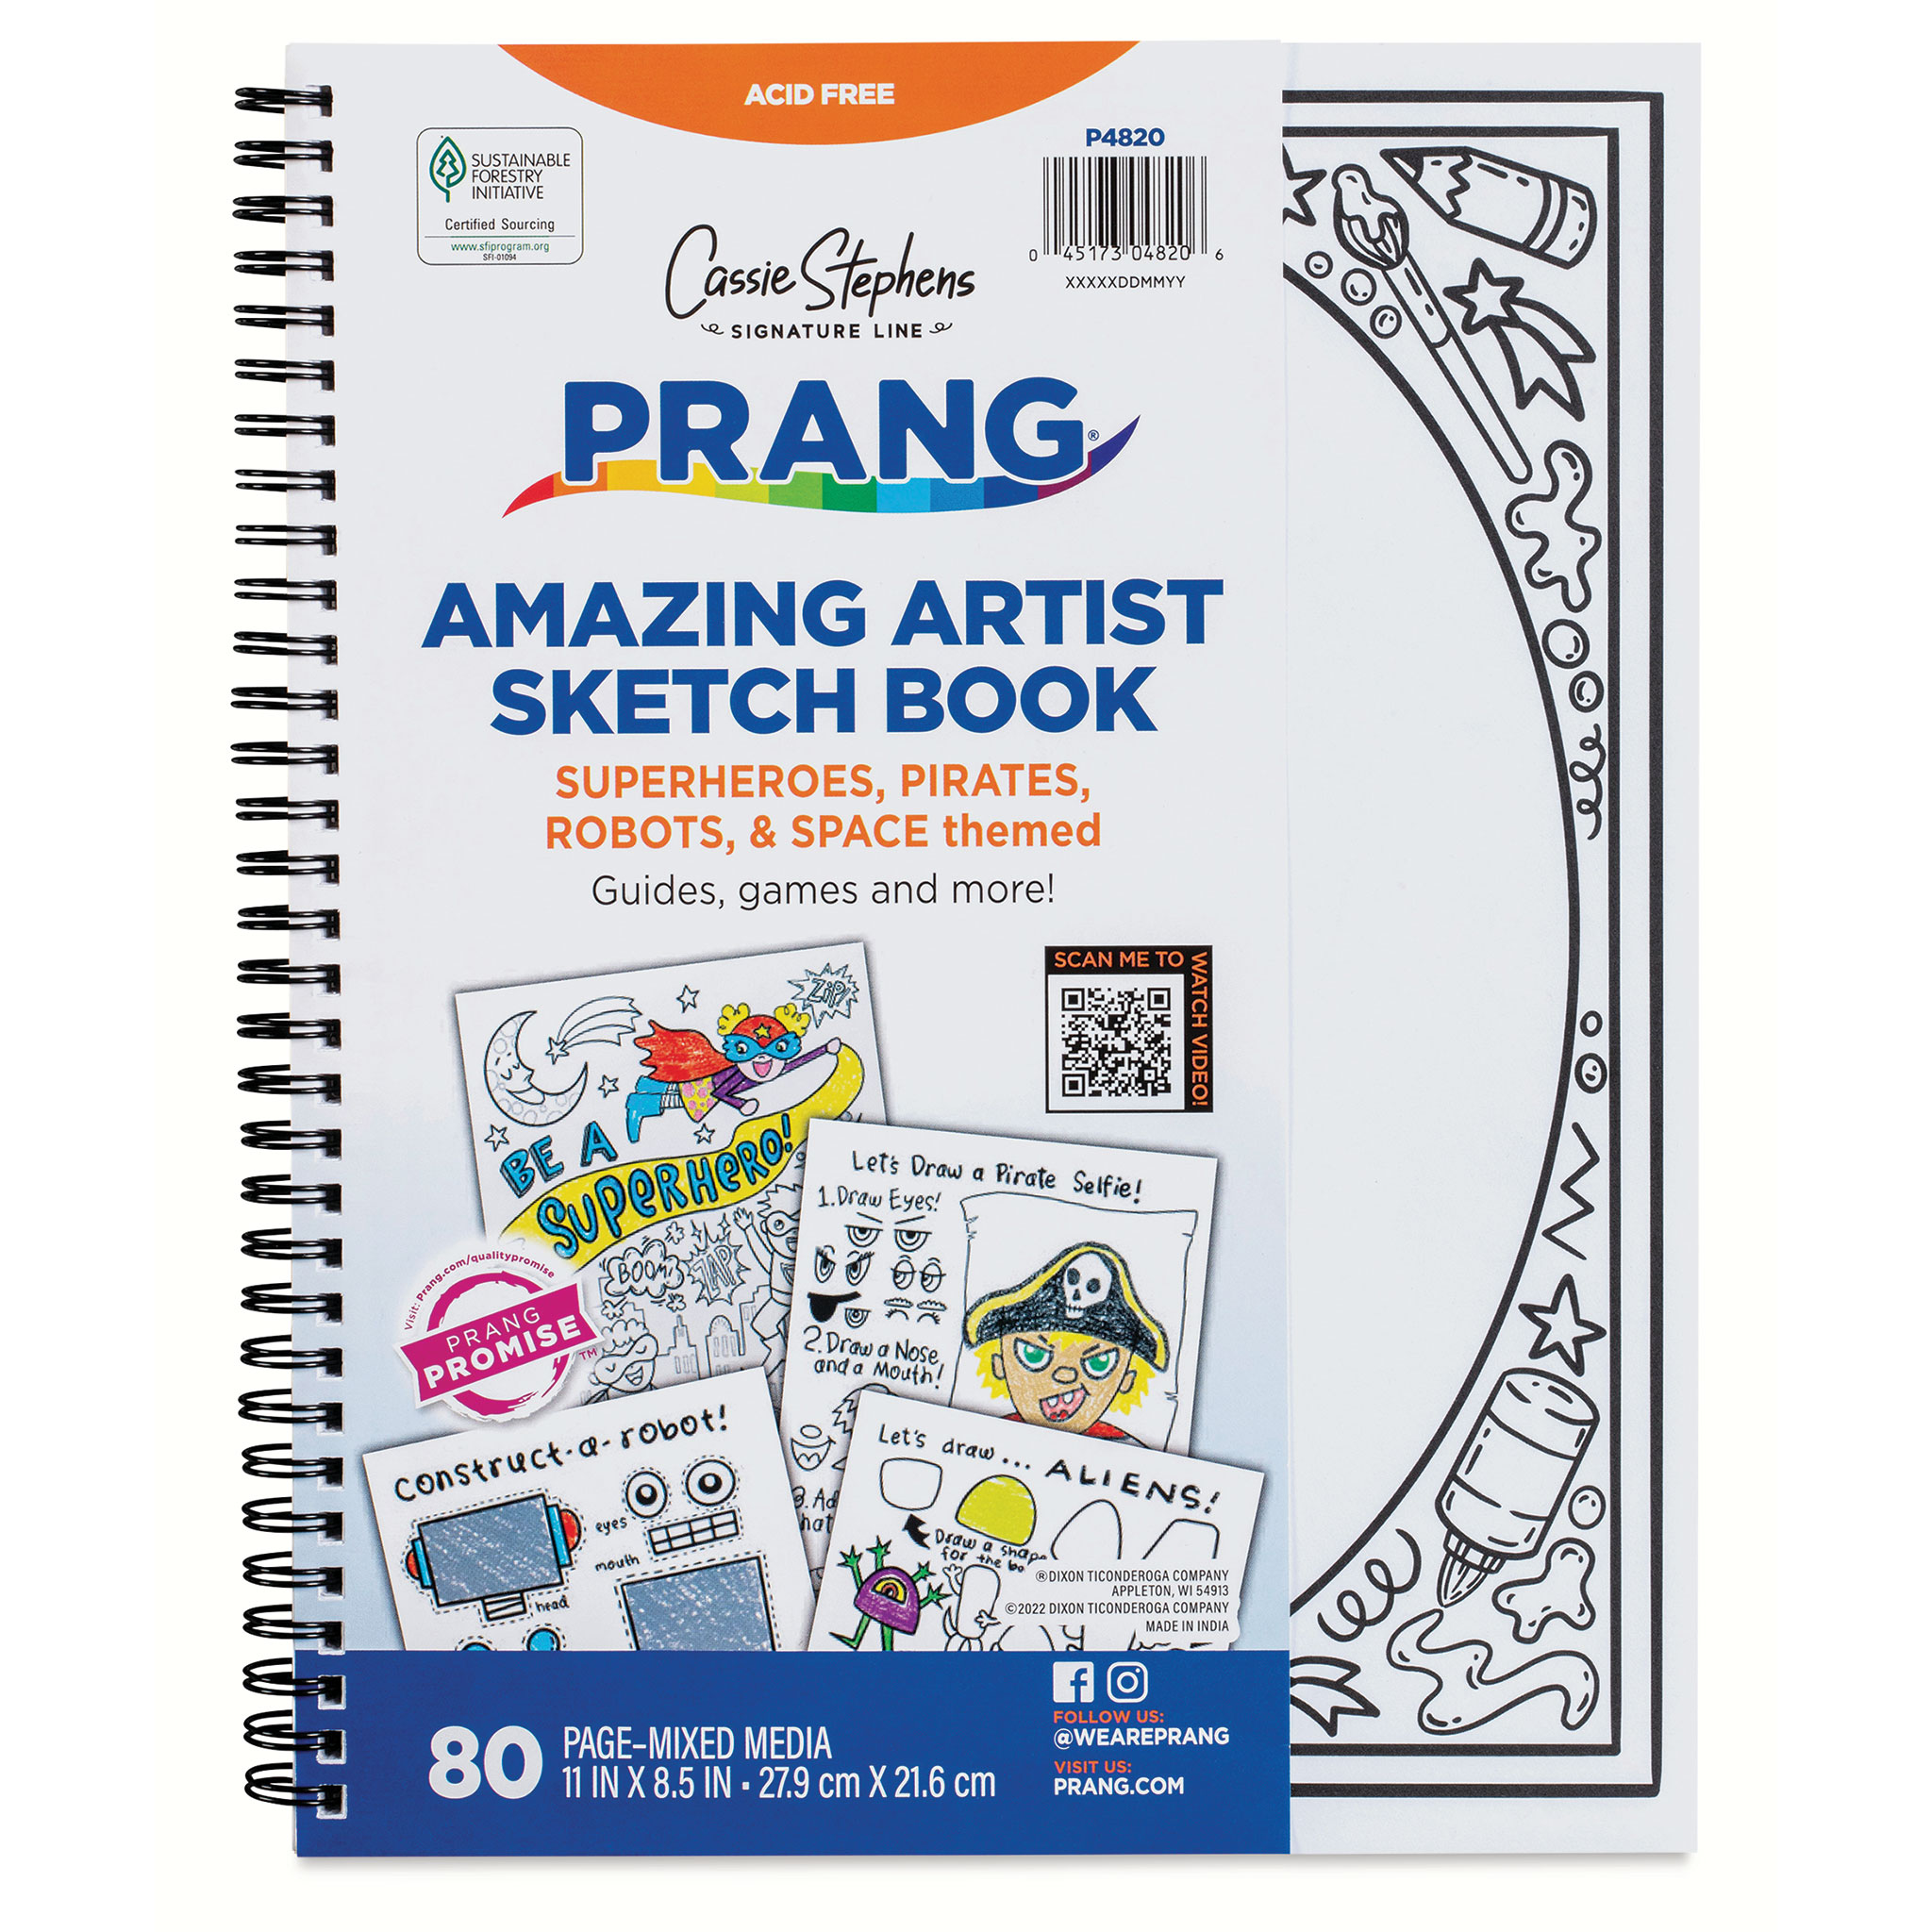 Sketch Book for Kids: Drawing Pad - 130 Pages (8. 5 X11 ) - Notebook for Drawing, Writing, Painting, Sketching - Blank Paper for Drawing